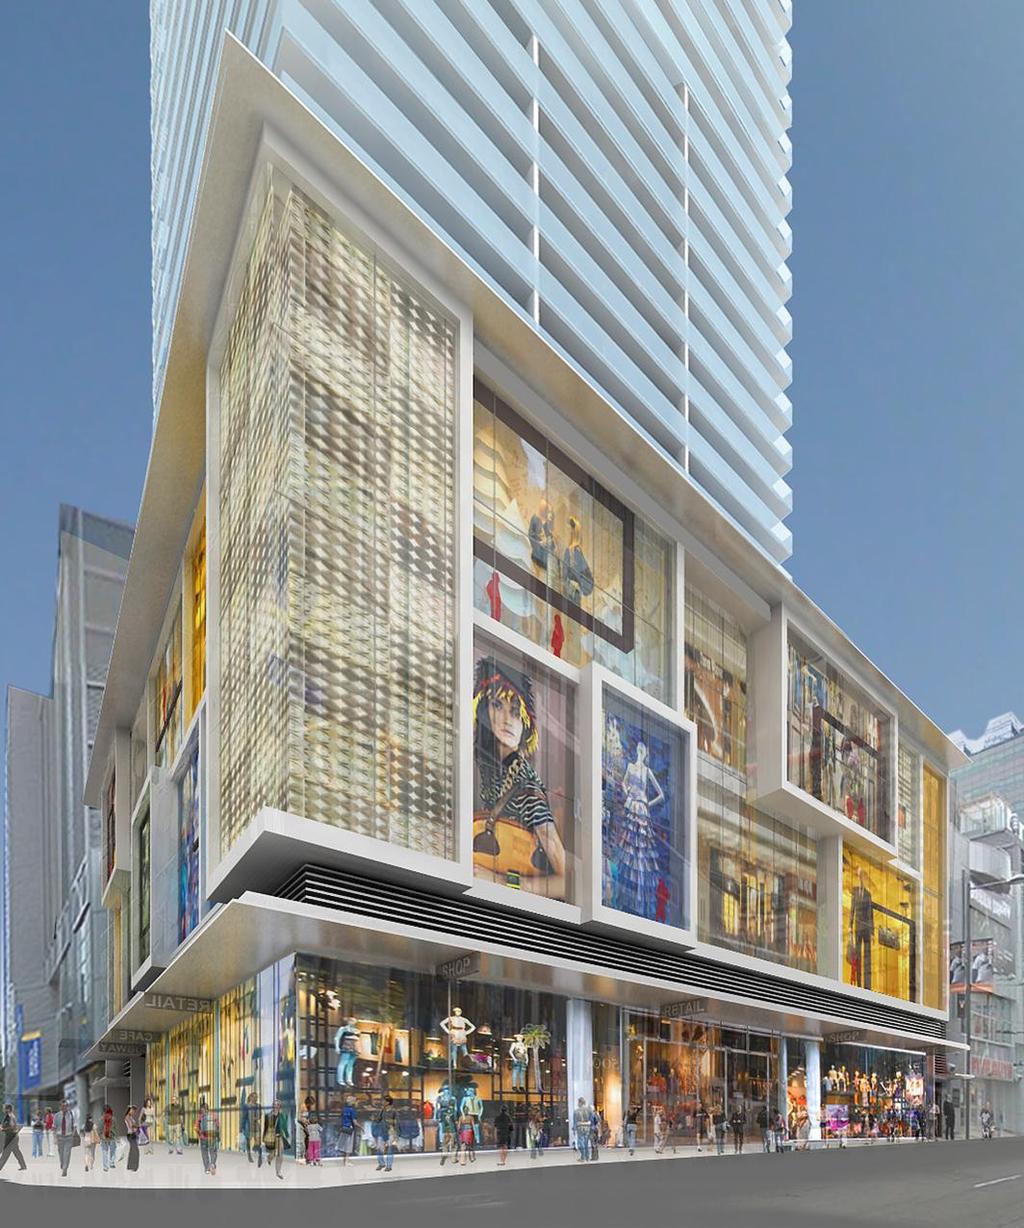 CBRE Toronto North is pleased to present the development of 335 Yonge Street, to be located at the southeast corner of Yonge Street and Gould Street at a main gateway to Ryerson University.